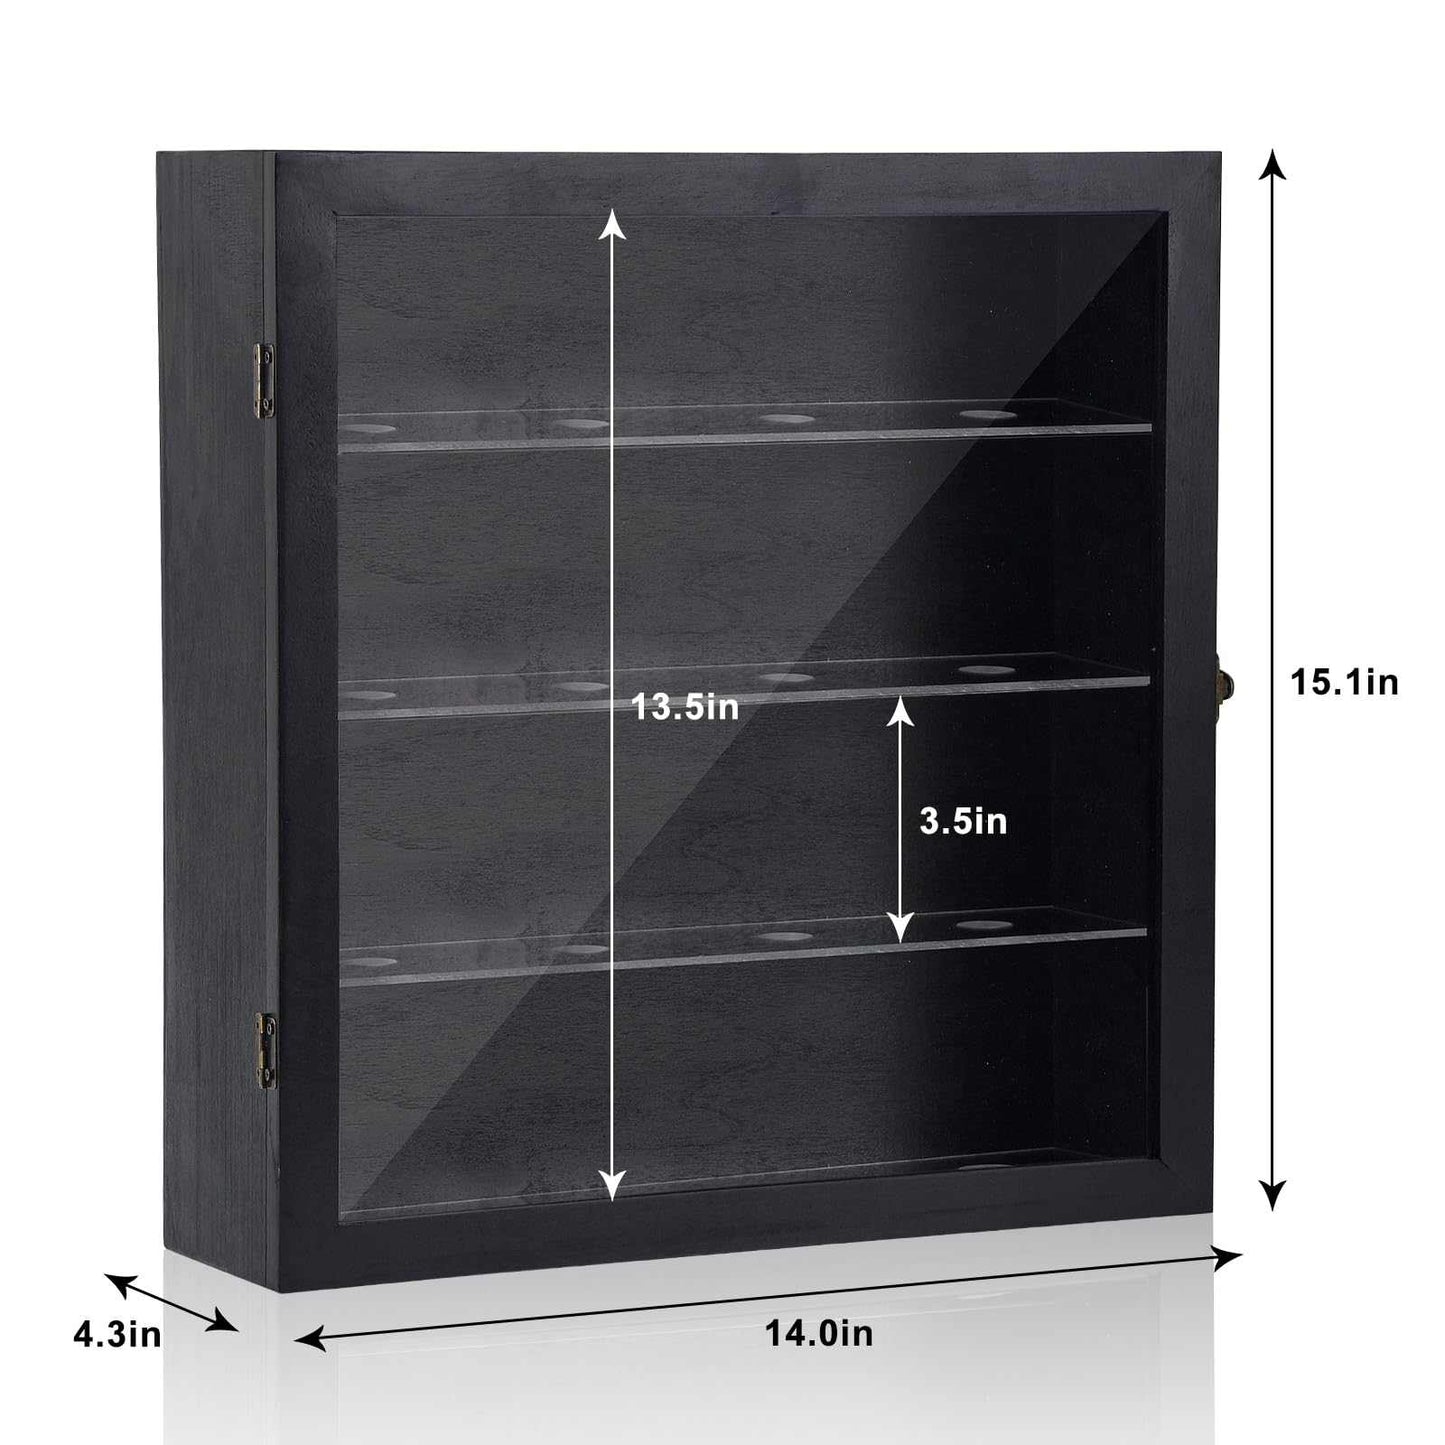 LED Clear Acrylic Baseball Display Case | UV Protected Wall-Mounted Holder for Autographed Memorabilia and Collectibles